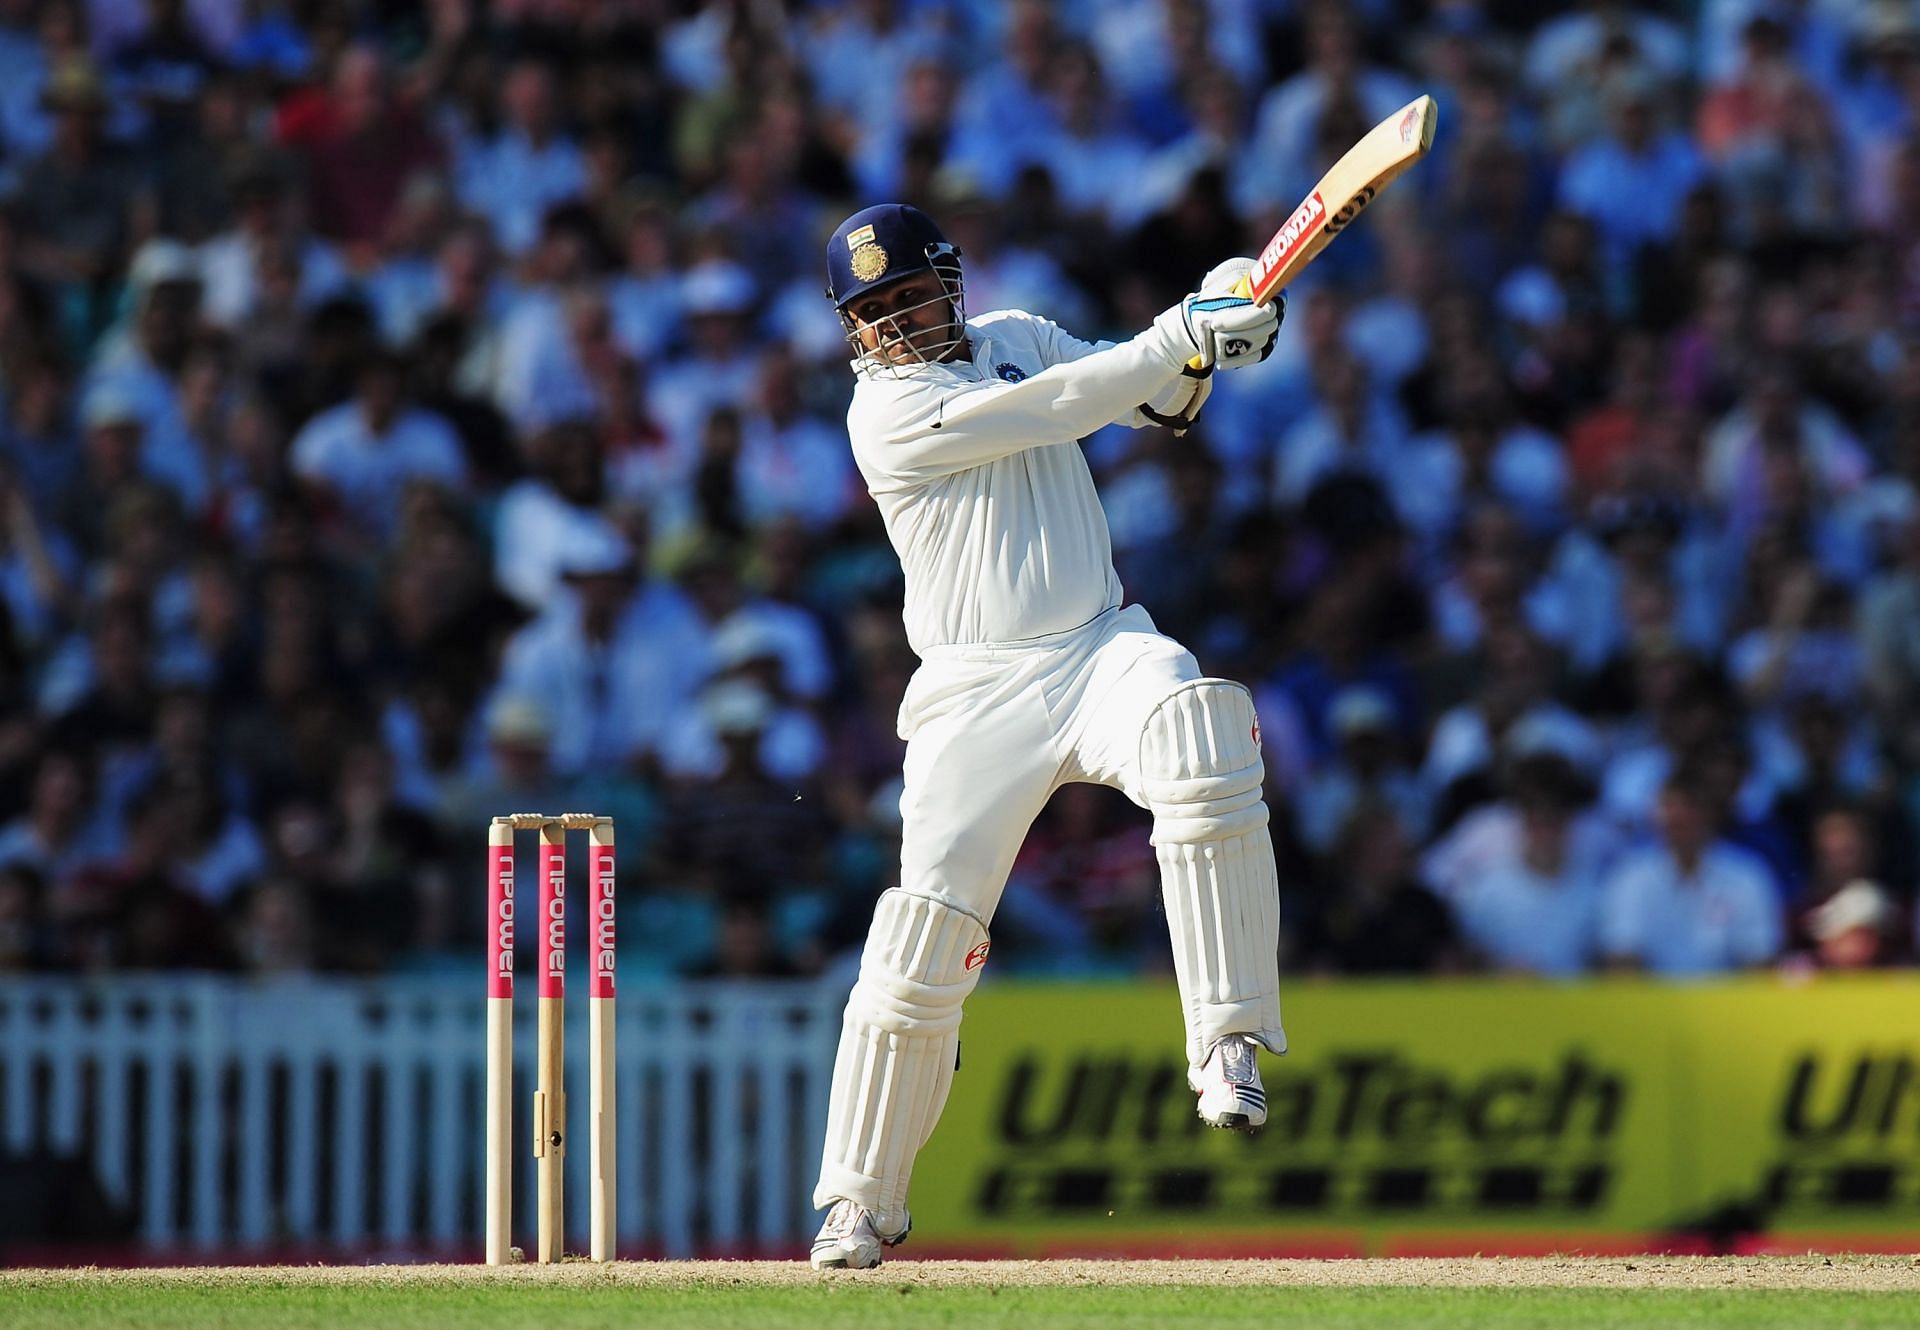 Virender Sehwag represented Haryana in his last first-class season. (Pic: Getty Images)